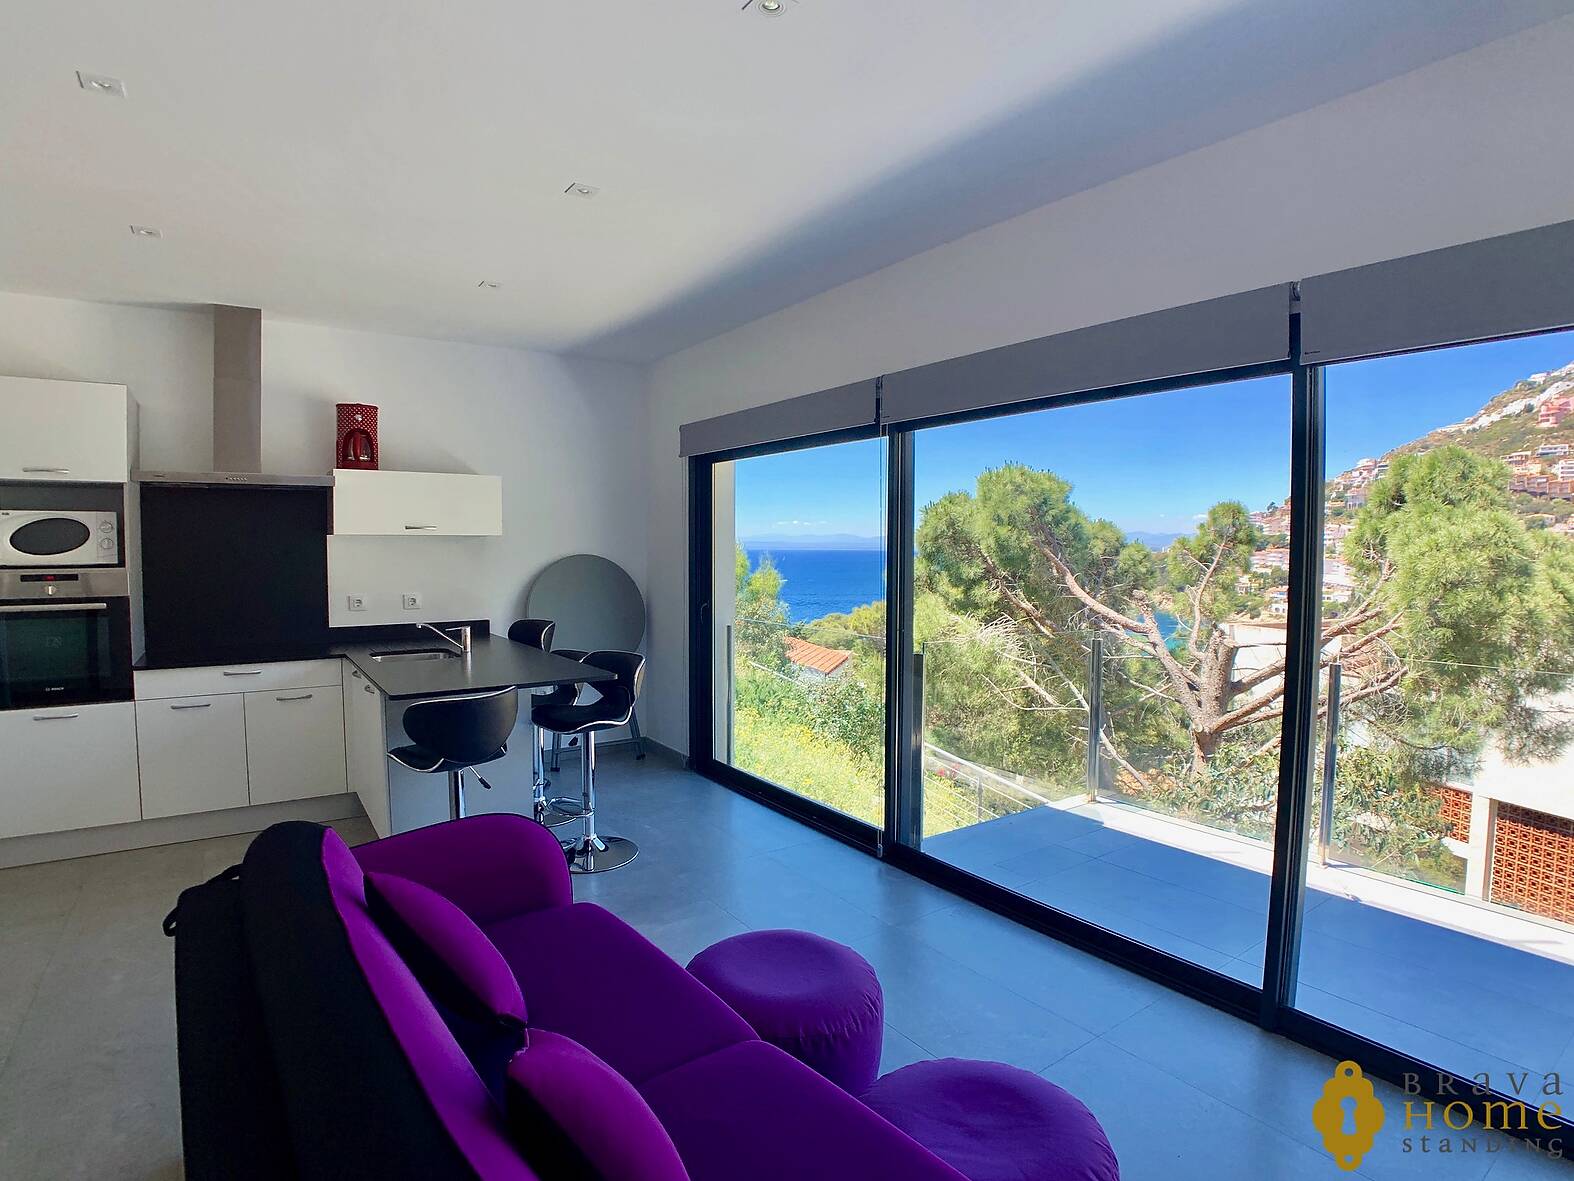 Splendid contemporary villa with sea view, for sale in Rosas - Canyelles